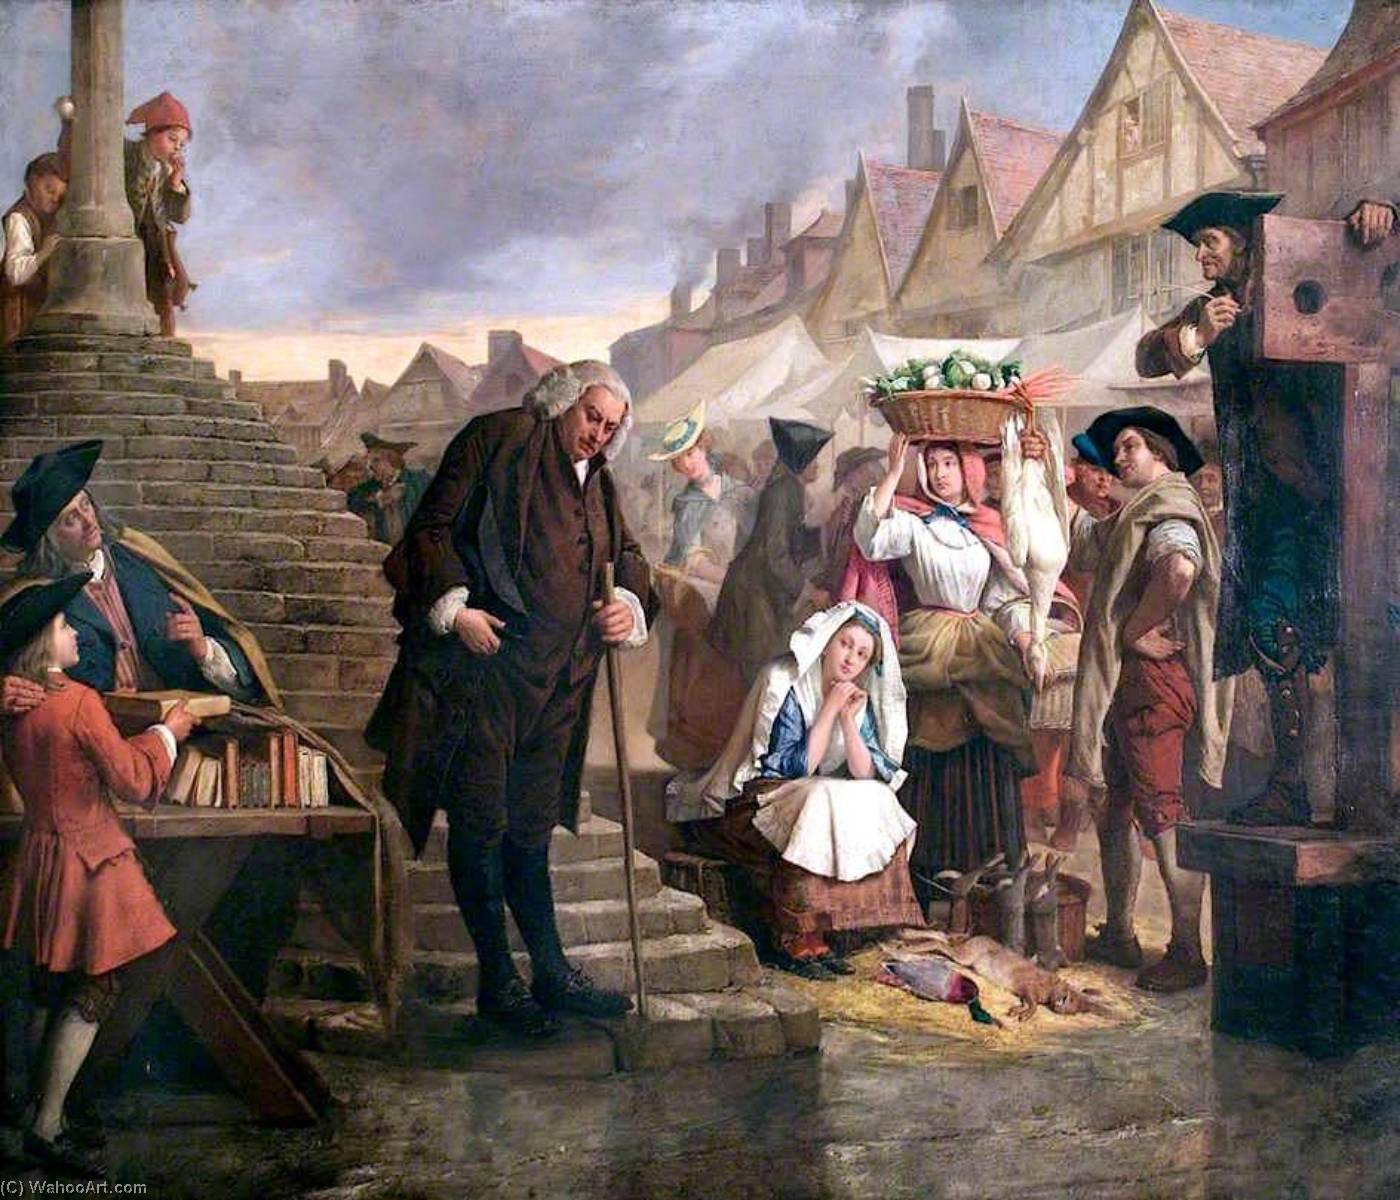 Buy Museum Art Reproductions Johnson, Doing Penance in the Market Place of Uttoxeter, Staffordshire, 1869 by Eyre Crowe (1864-1925) | ArtsDot.com